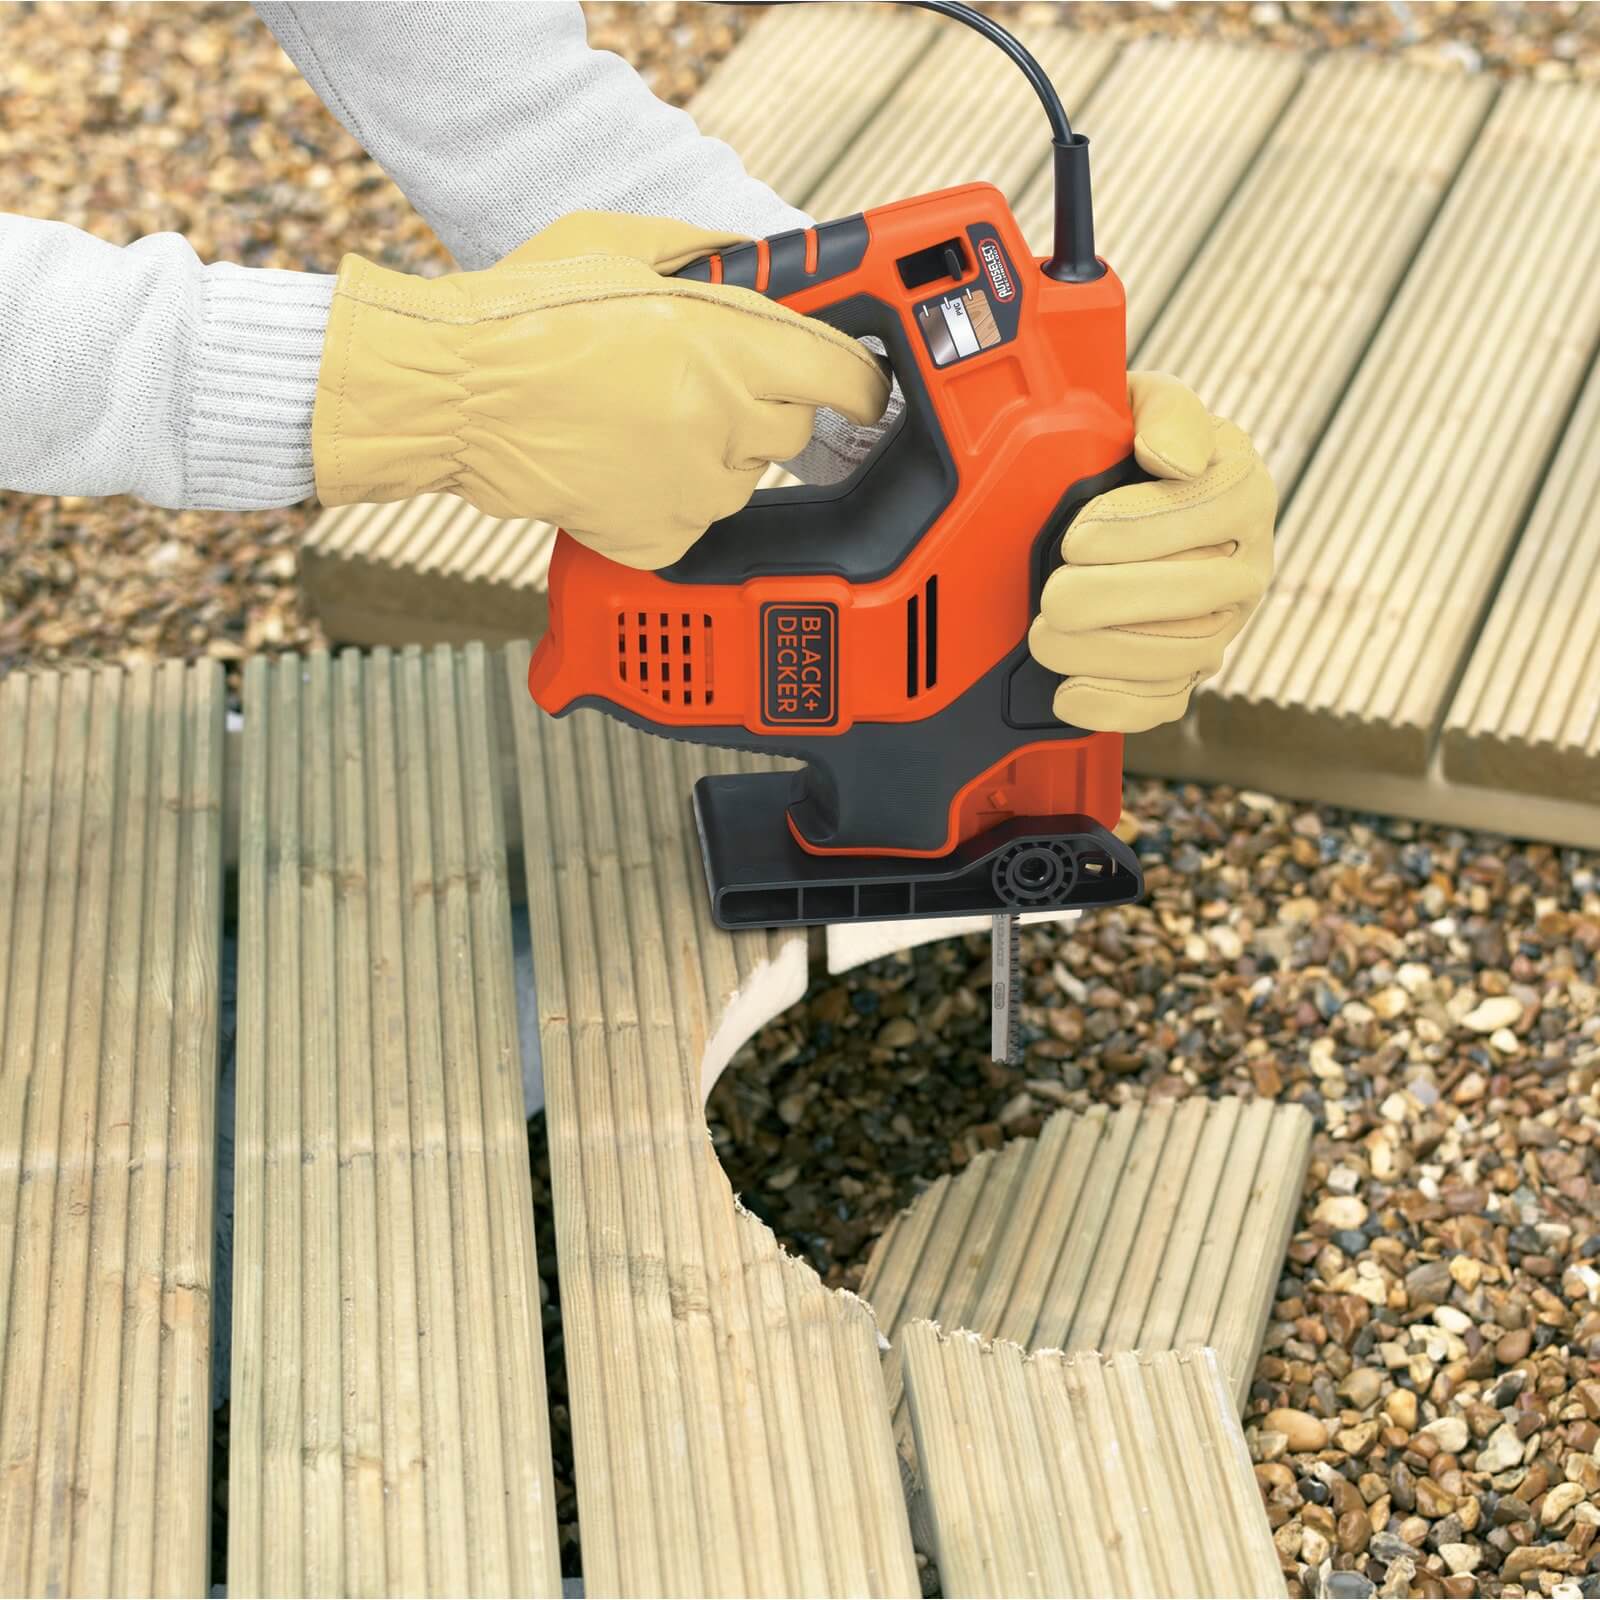 BLACK+DECKER Scorpion Auto-select 500W Powered Hand Saw with Blades and Kit Box (RS890K-GB)